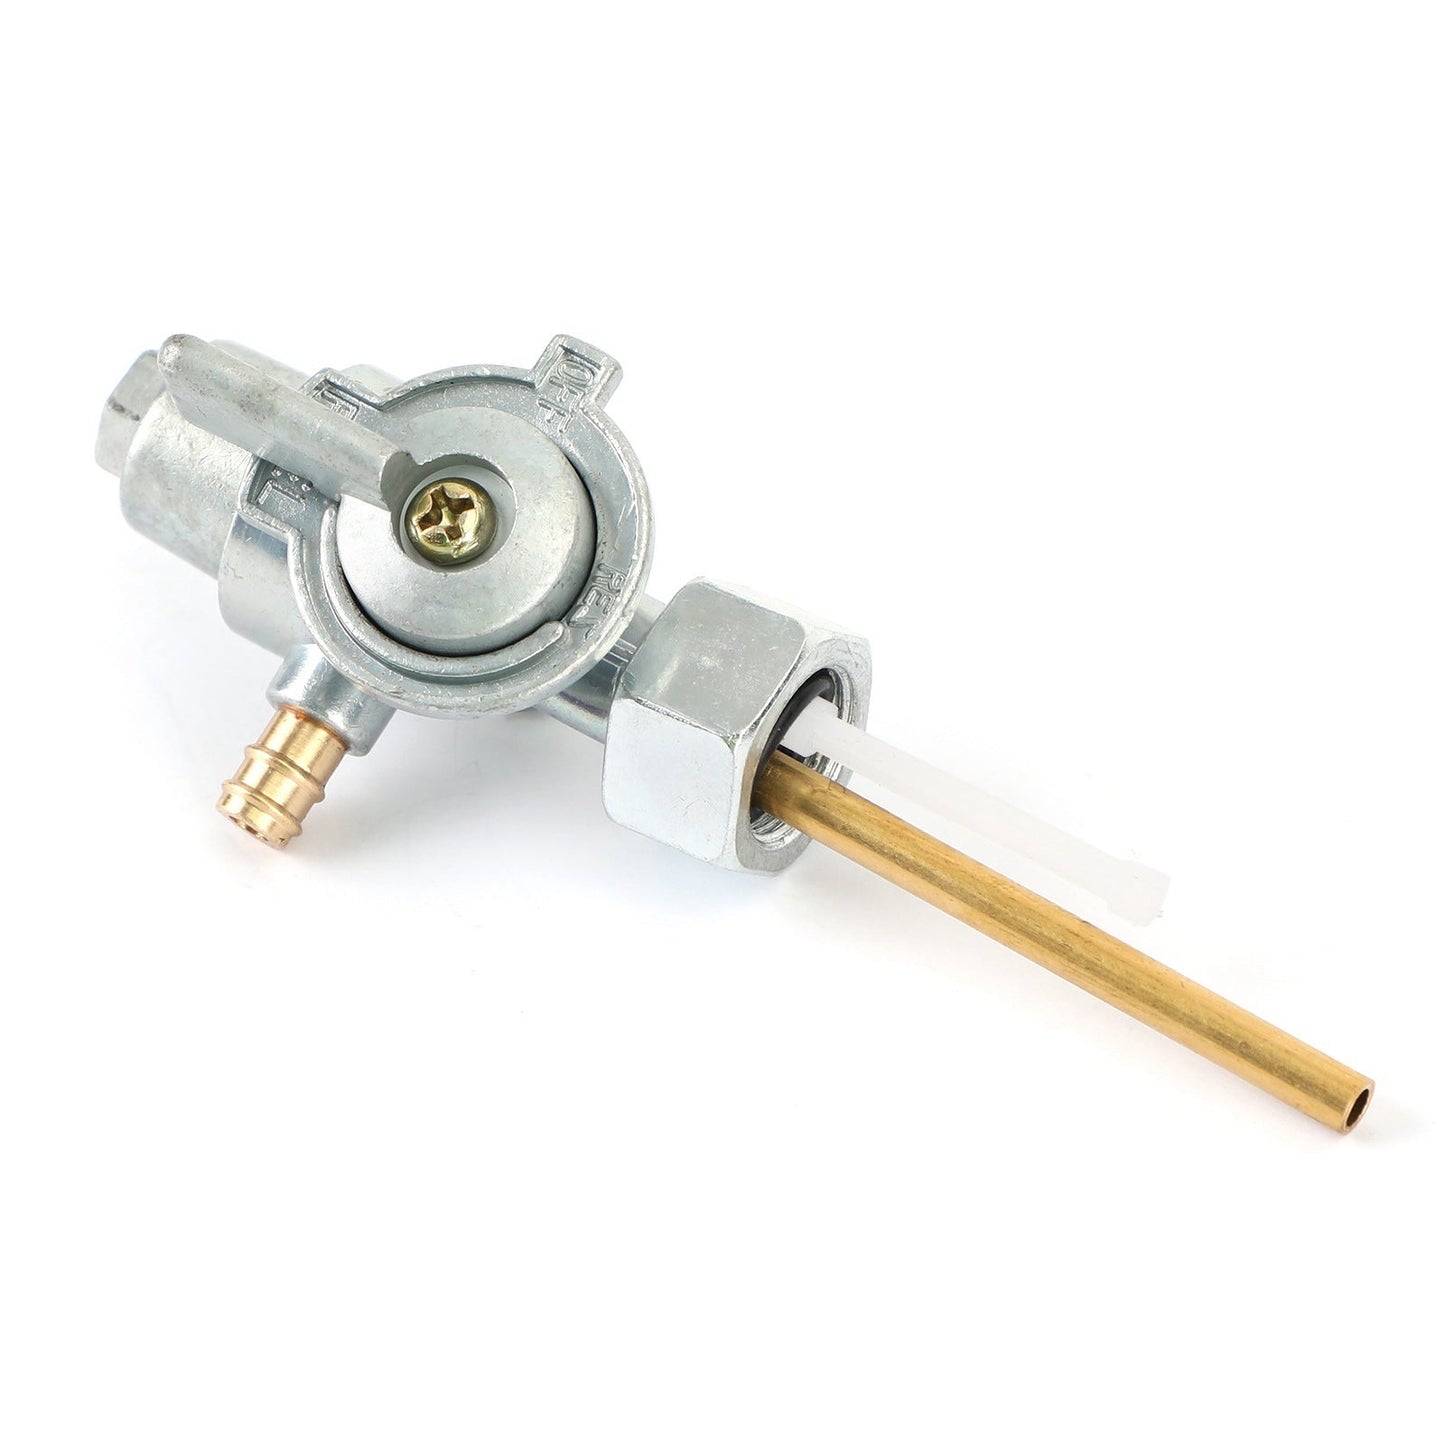 Fuel Valve Petcock Fit For Yamaha YG5 YG1 YZ80 L5T RX50 DT80 TY80 367-24500-04